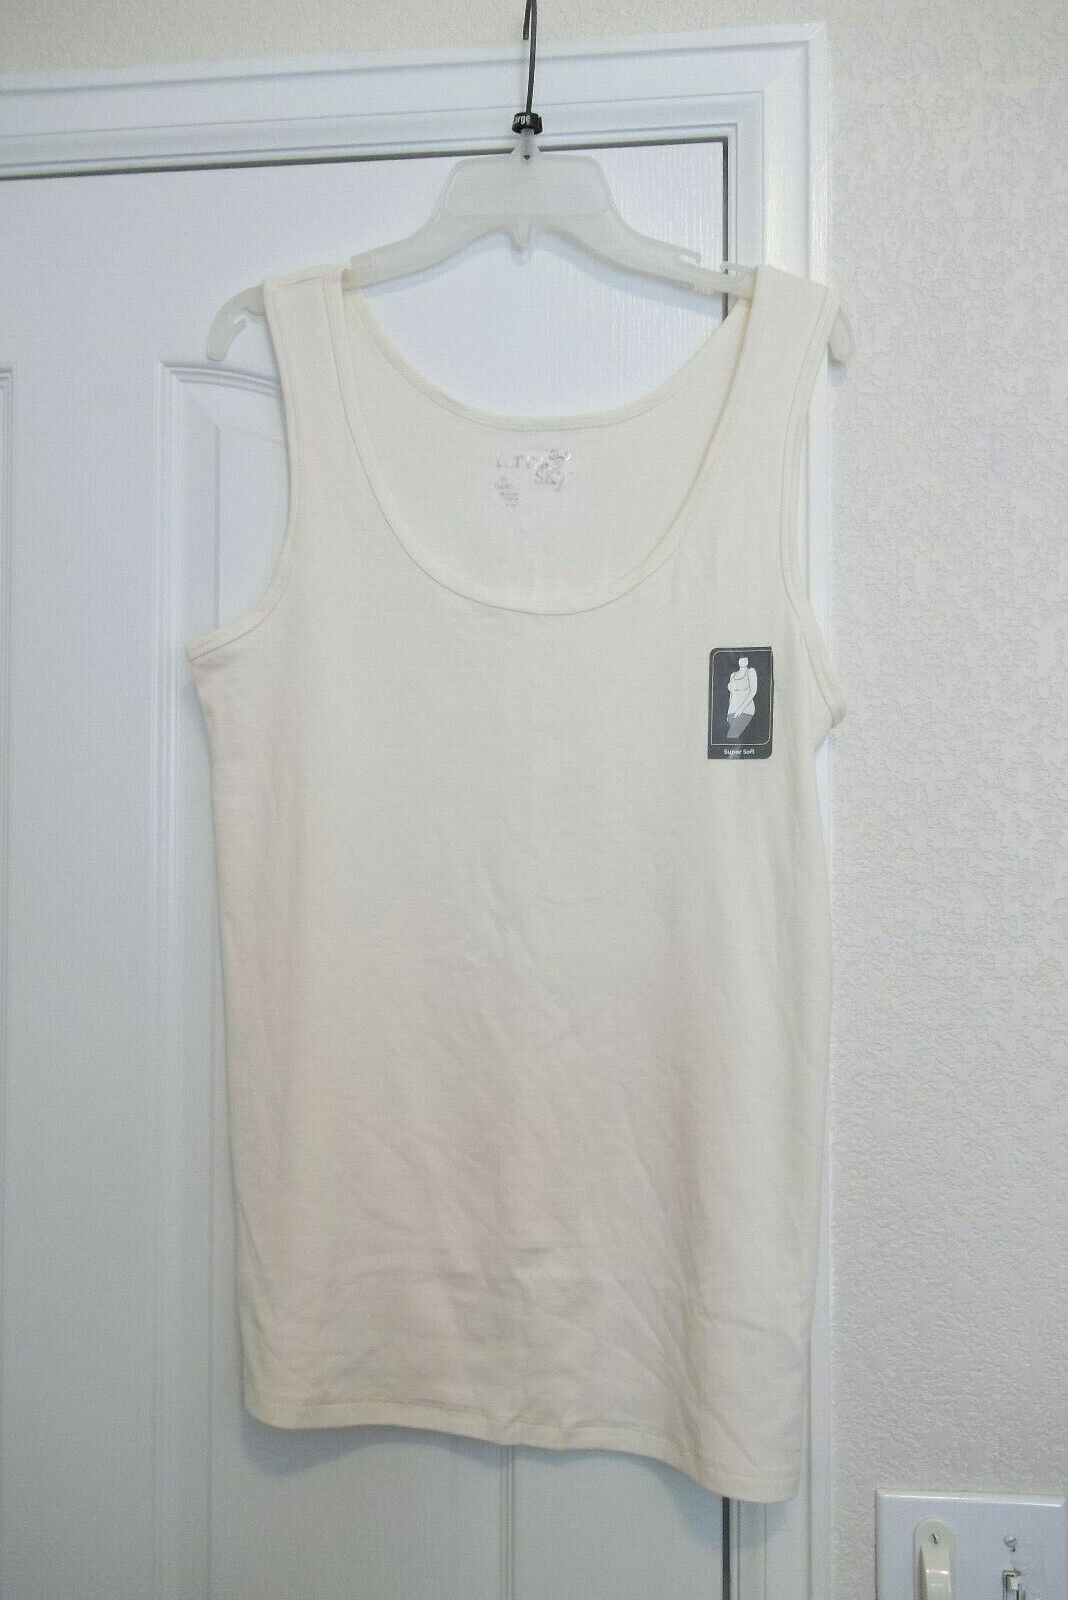 NEW TERRA & SKY WOMENS SUPER SOFT LONG LENGTH FIT LAYERING TANK TOP PLUS SIZES